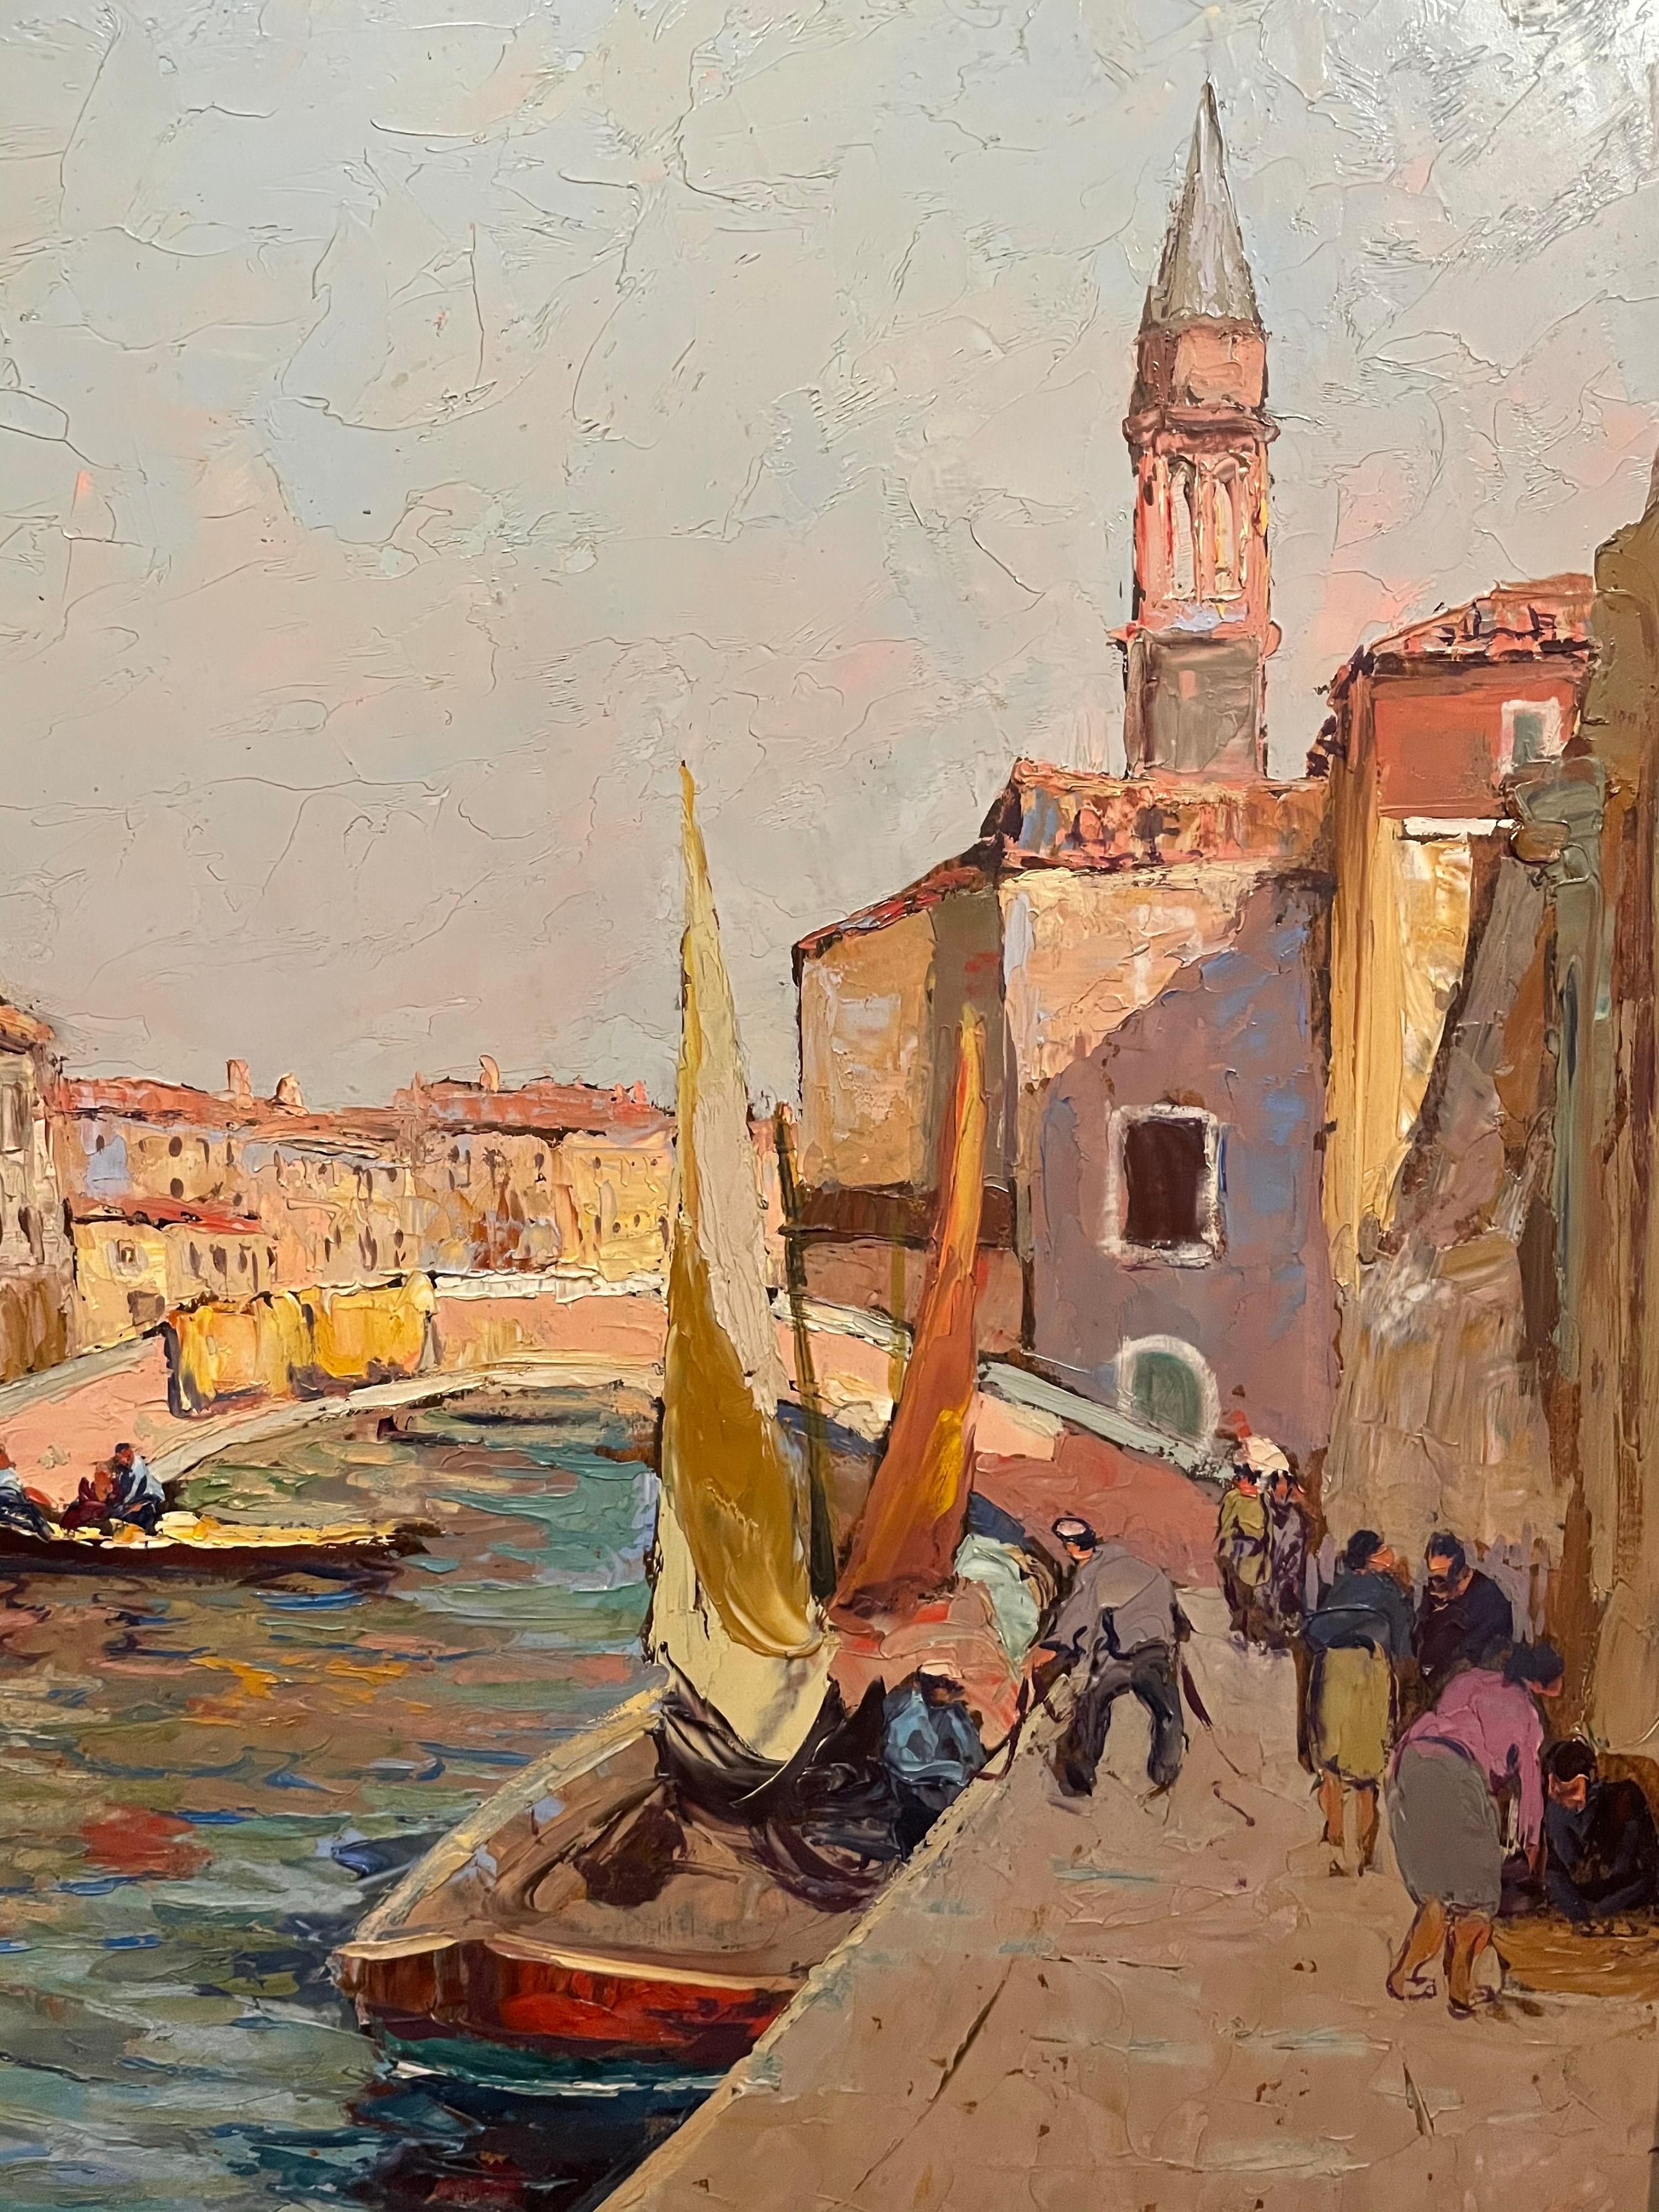 The Venetian Fish Market
Italian School, circa 1960's
indistinctly signed lower left
oil painting on board, framed
framed size: 75cm x 101cm
provenance: private collection, France

Beautiful depiction of the Venetian fish market, with much activity